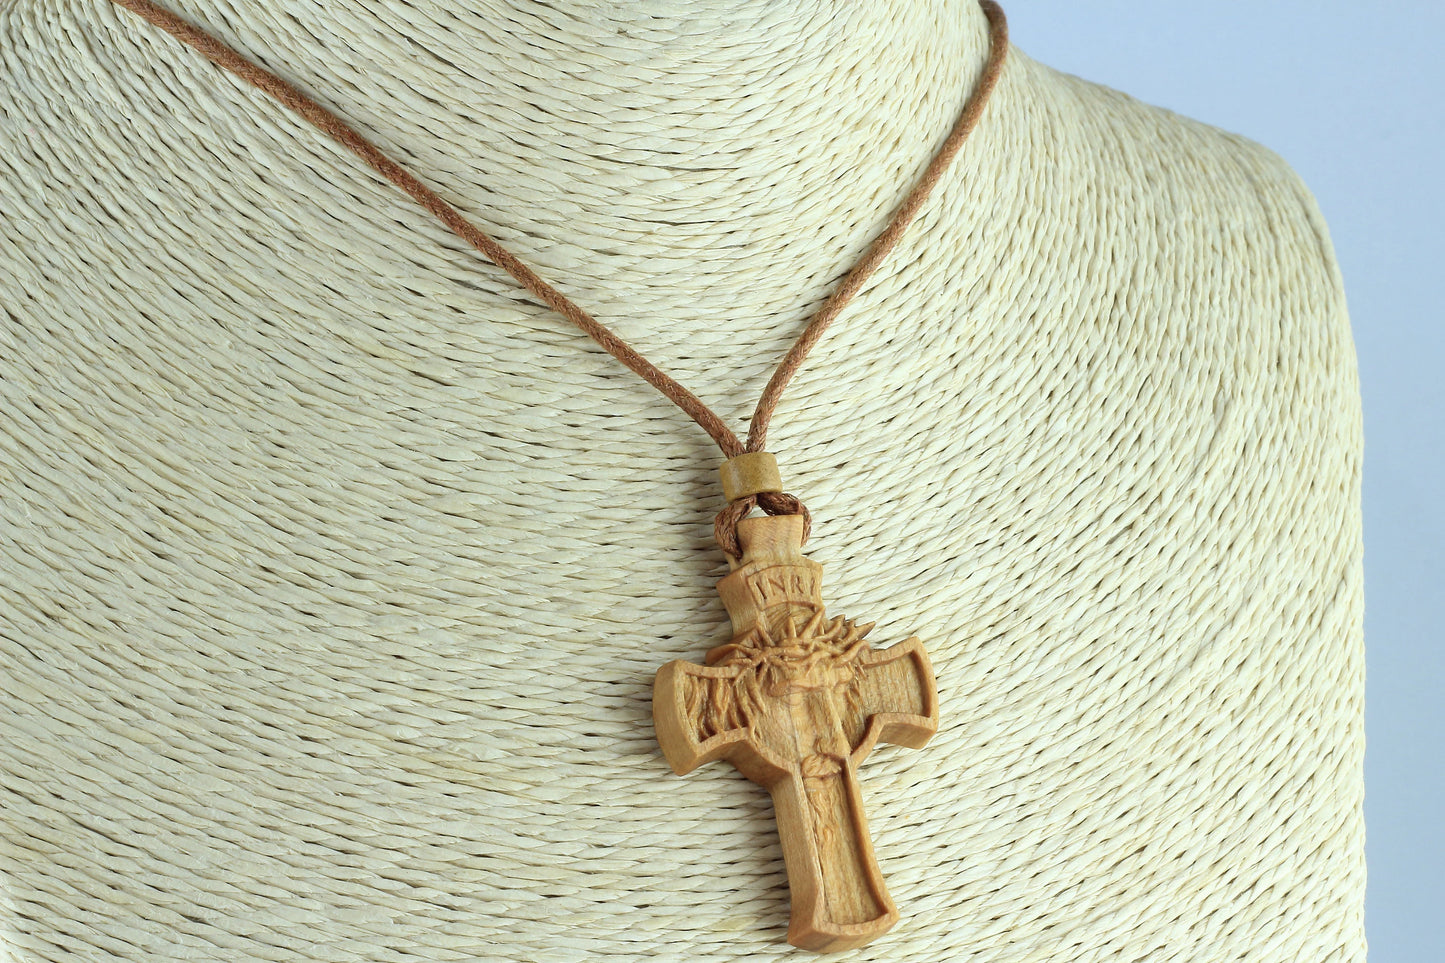 Exquisite Jesus Christ Wood Necklace | Handcrafted Pendant for Devotion